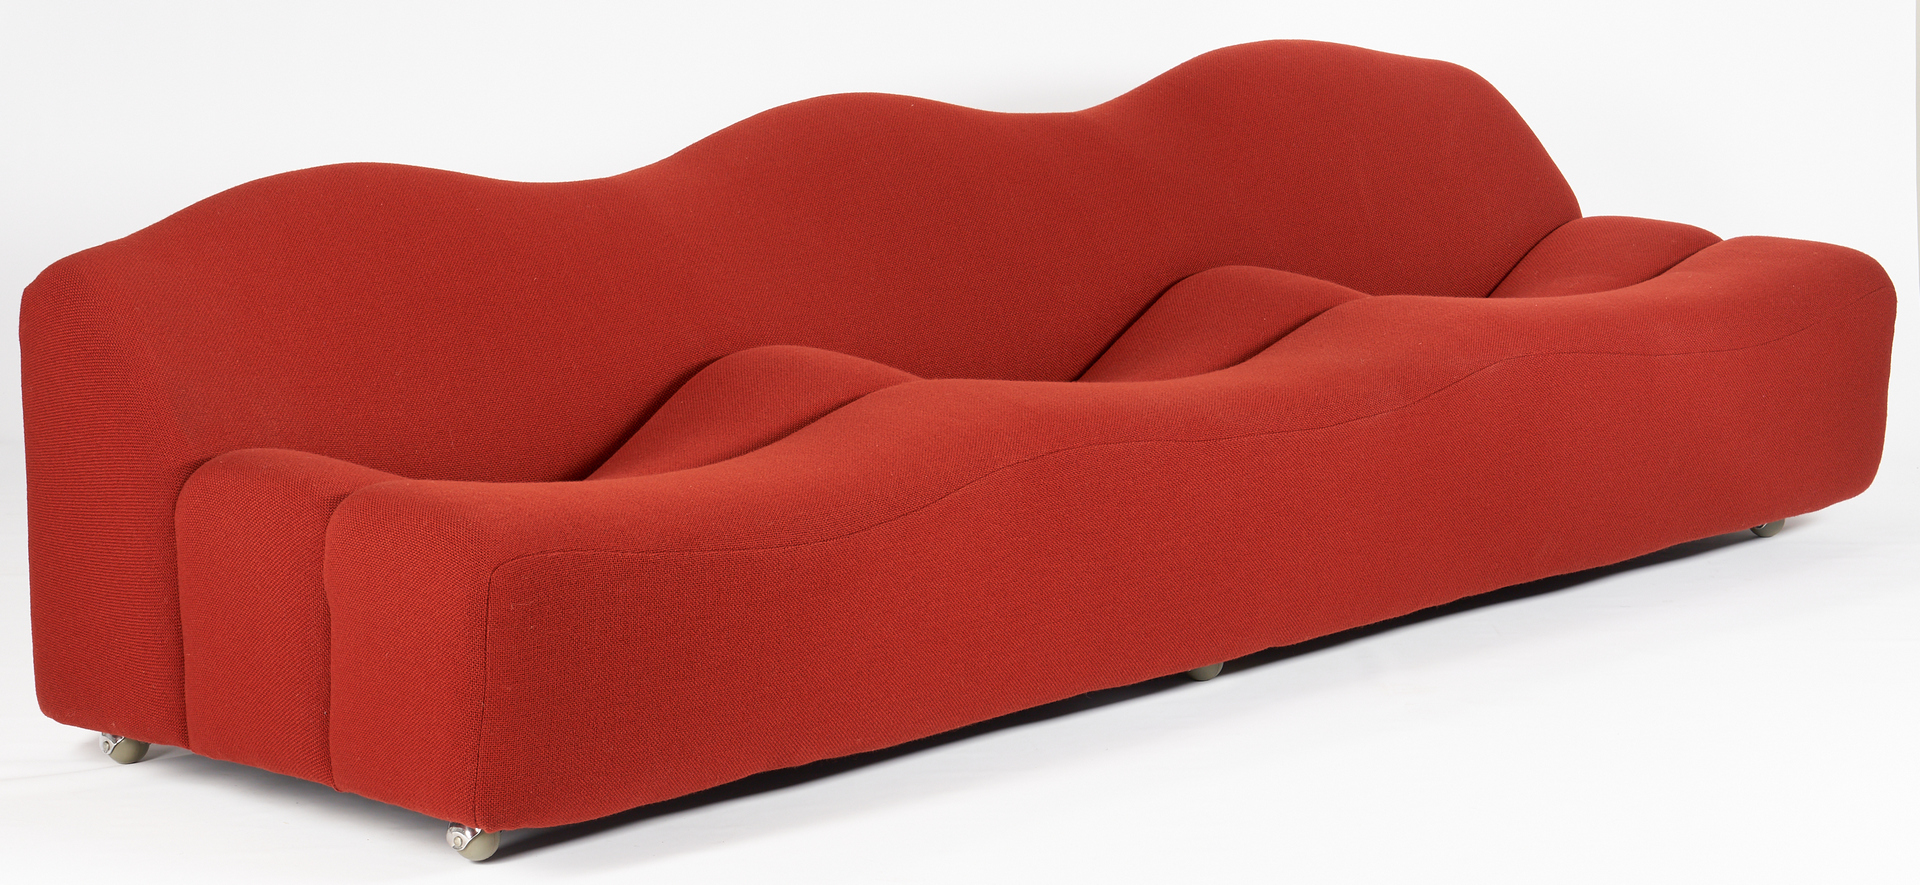 Lot 612: Pierre Paulin for Artifort ABCD Sofa 1 of 3